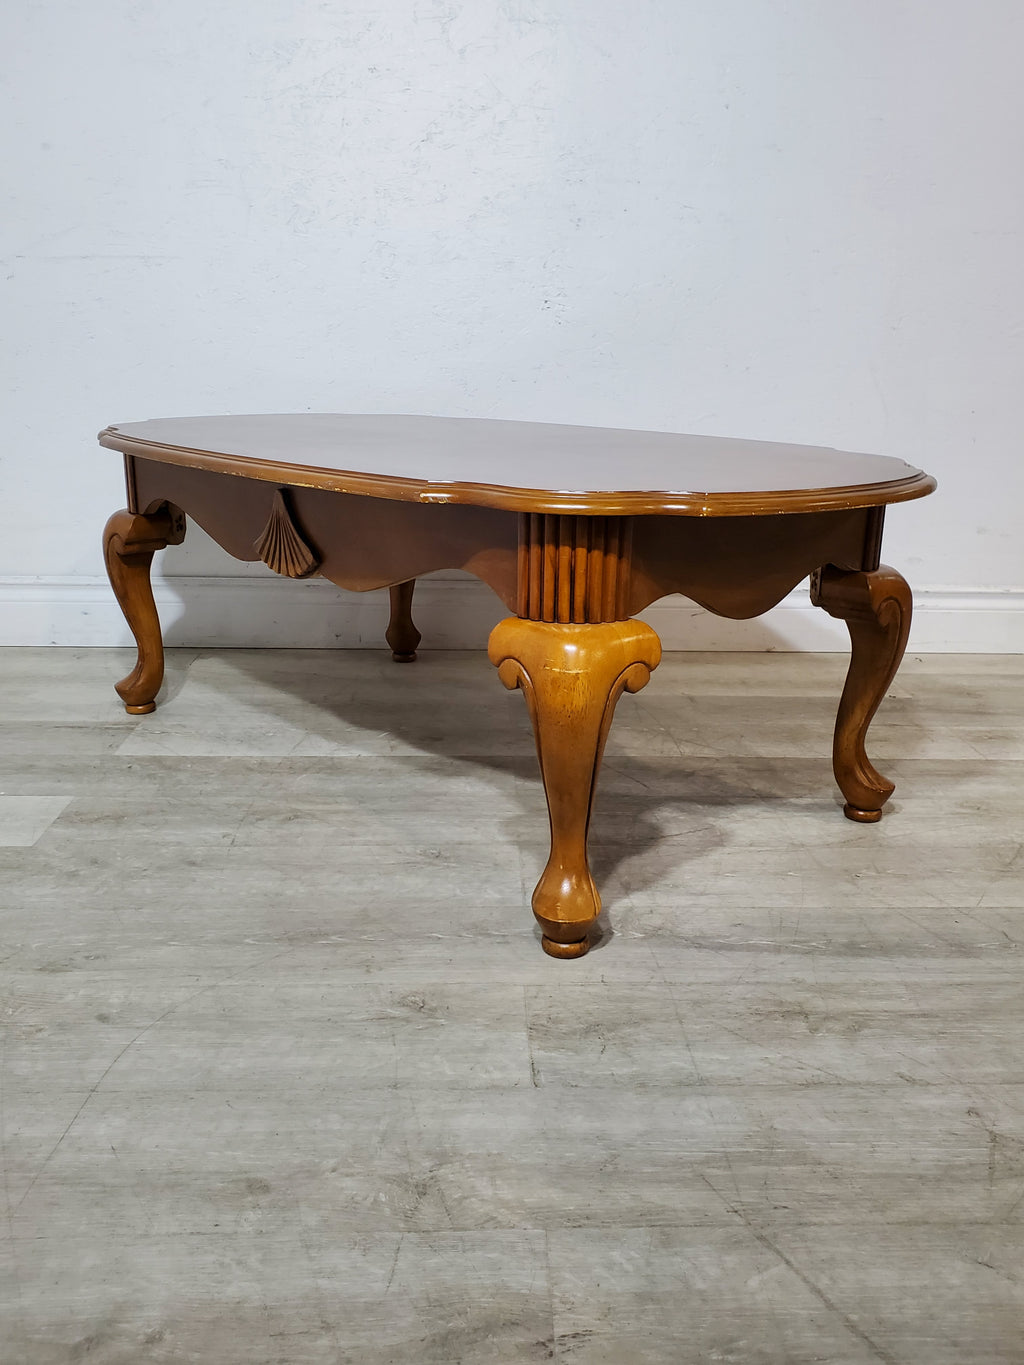 Queen Anne Styled Coffee Table